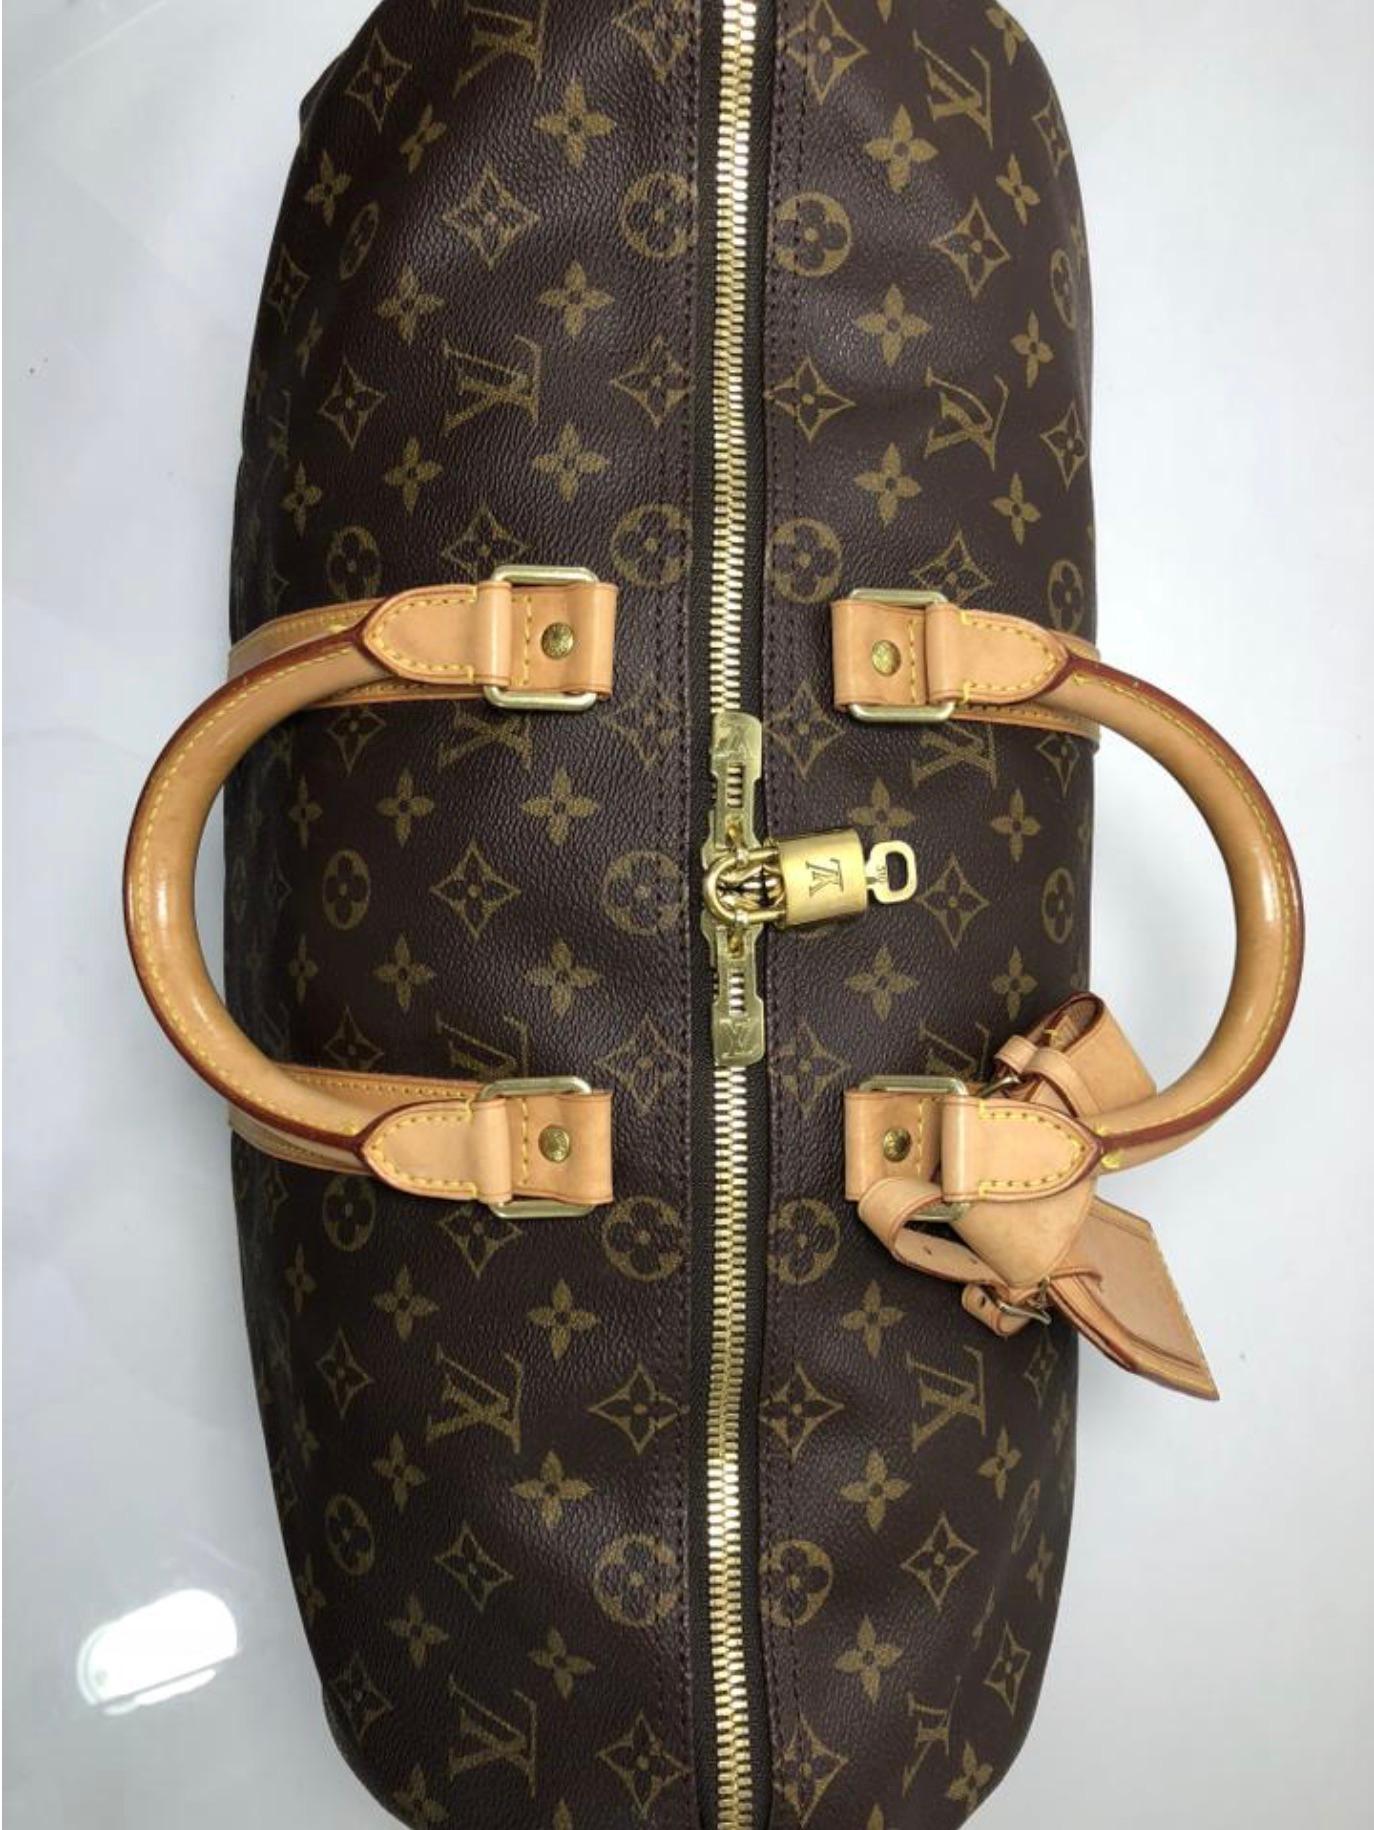  Louis Vuitton Monogram Keepall 45 Travel Duffle Handbag In Good Condition For Sale In Saint Charles, IL